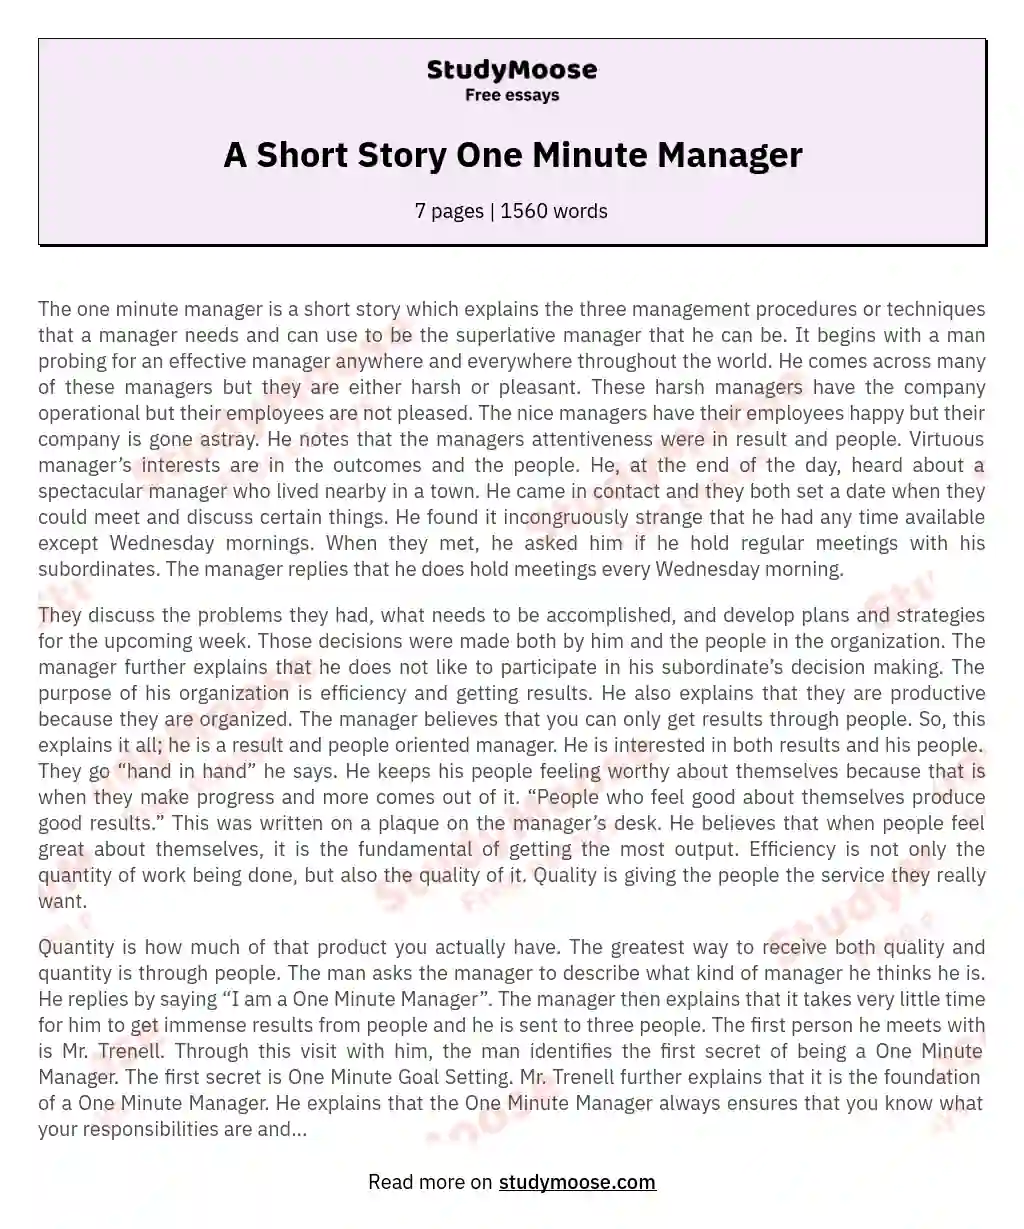 A Short Story One Minute Manager essay